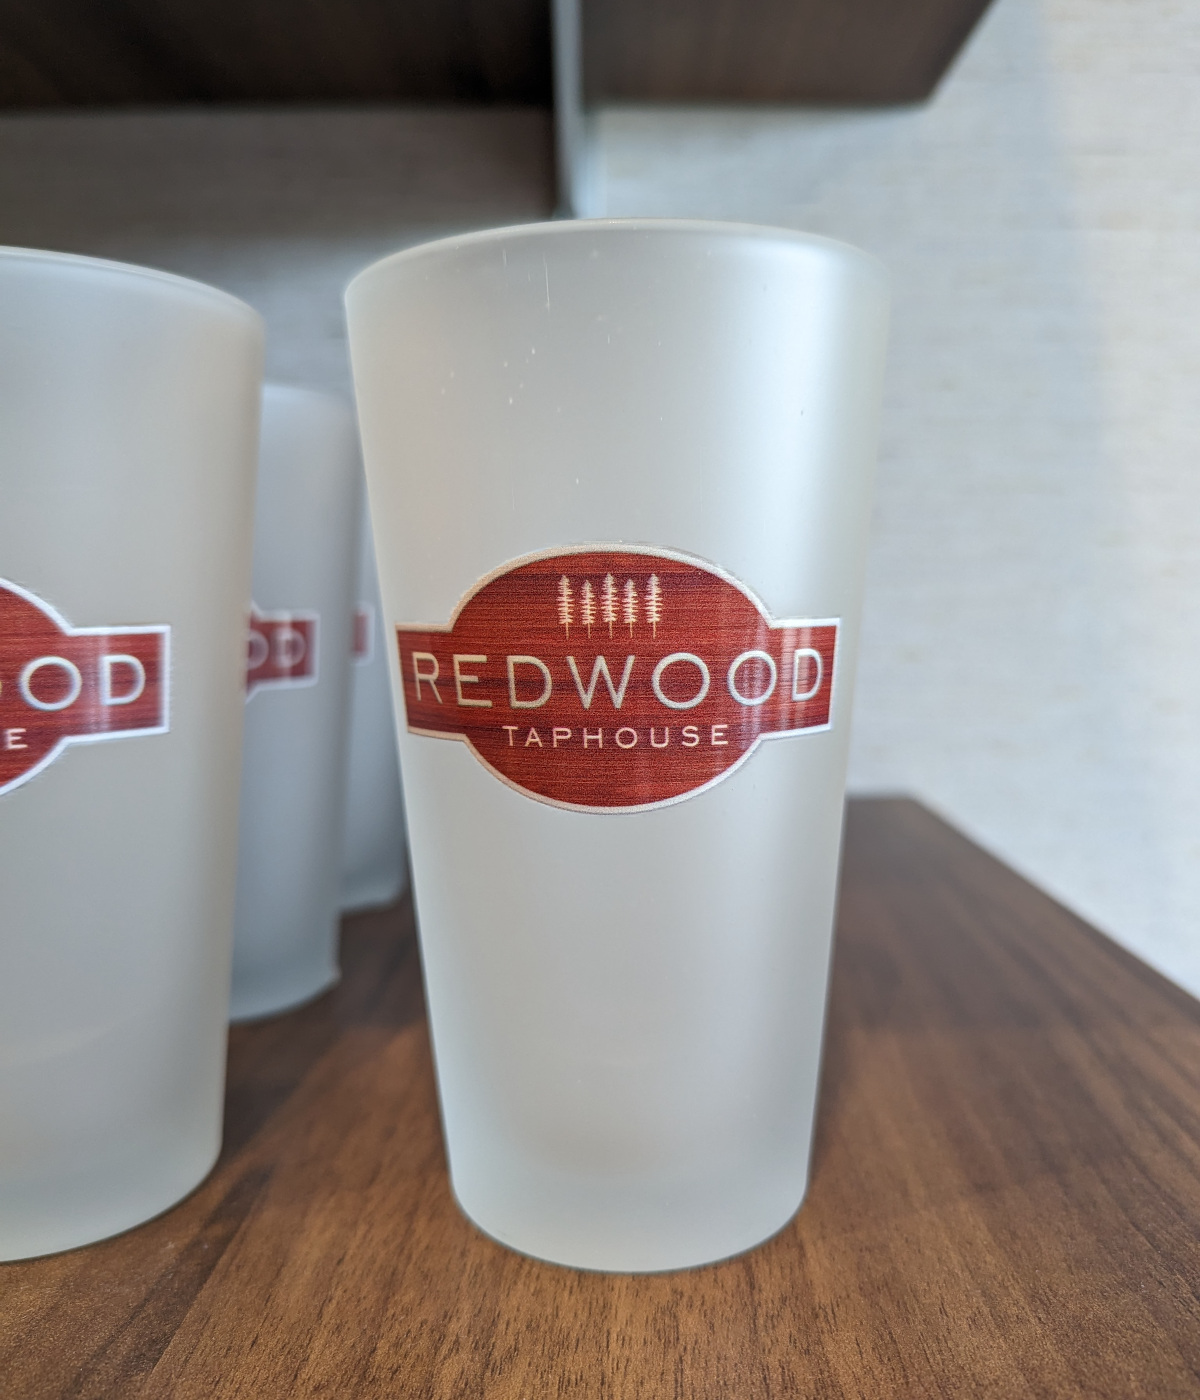 eagle mountain casino - items on sale - redwood taphouse